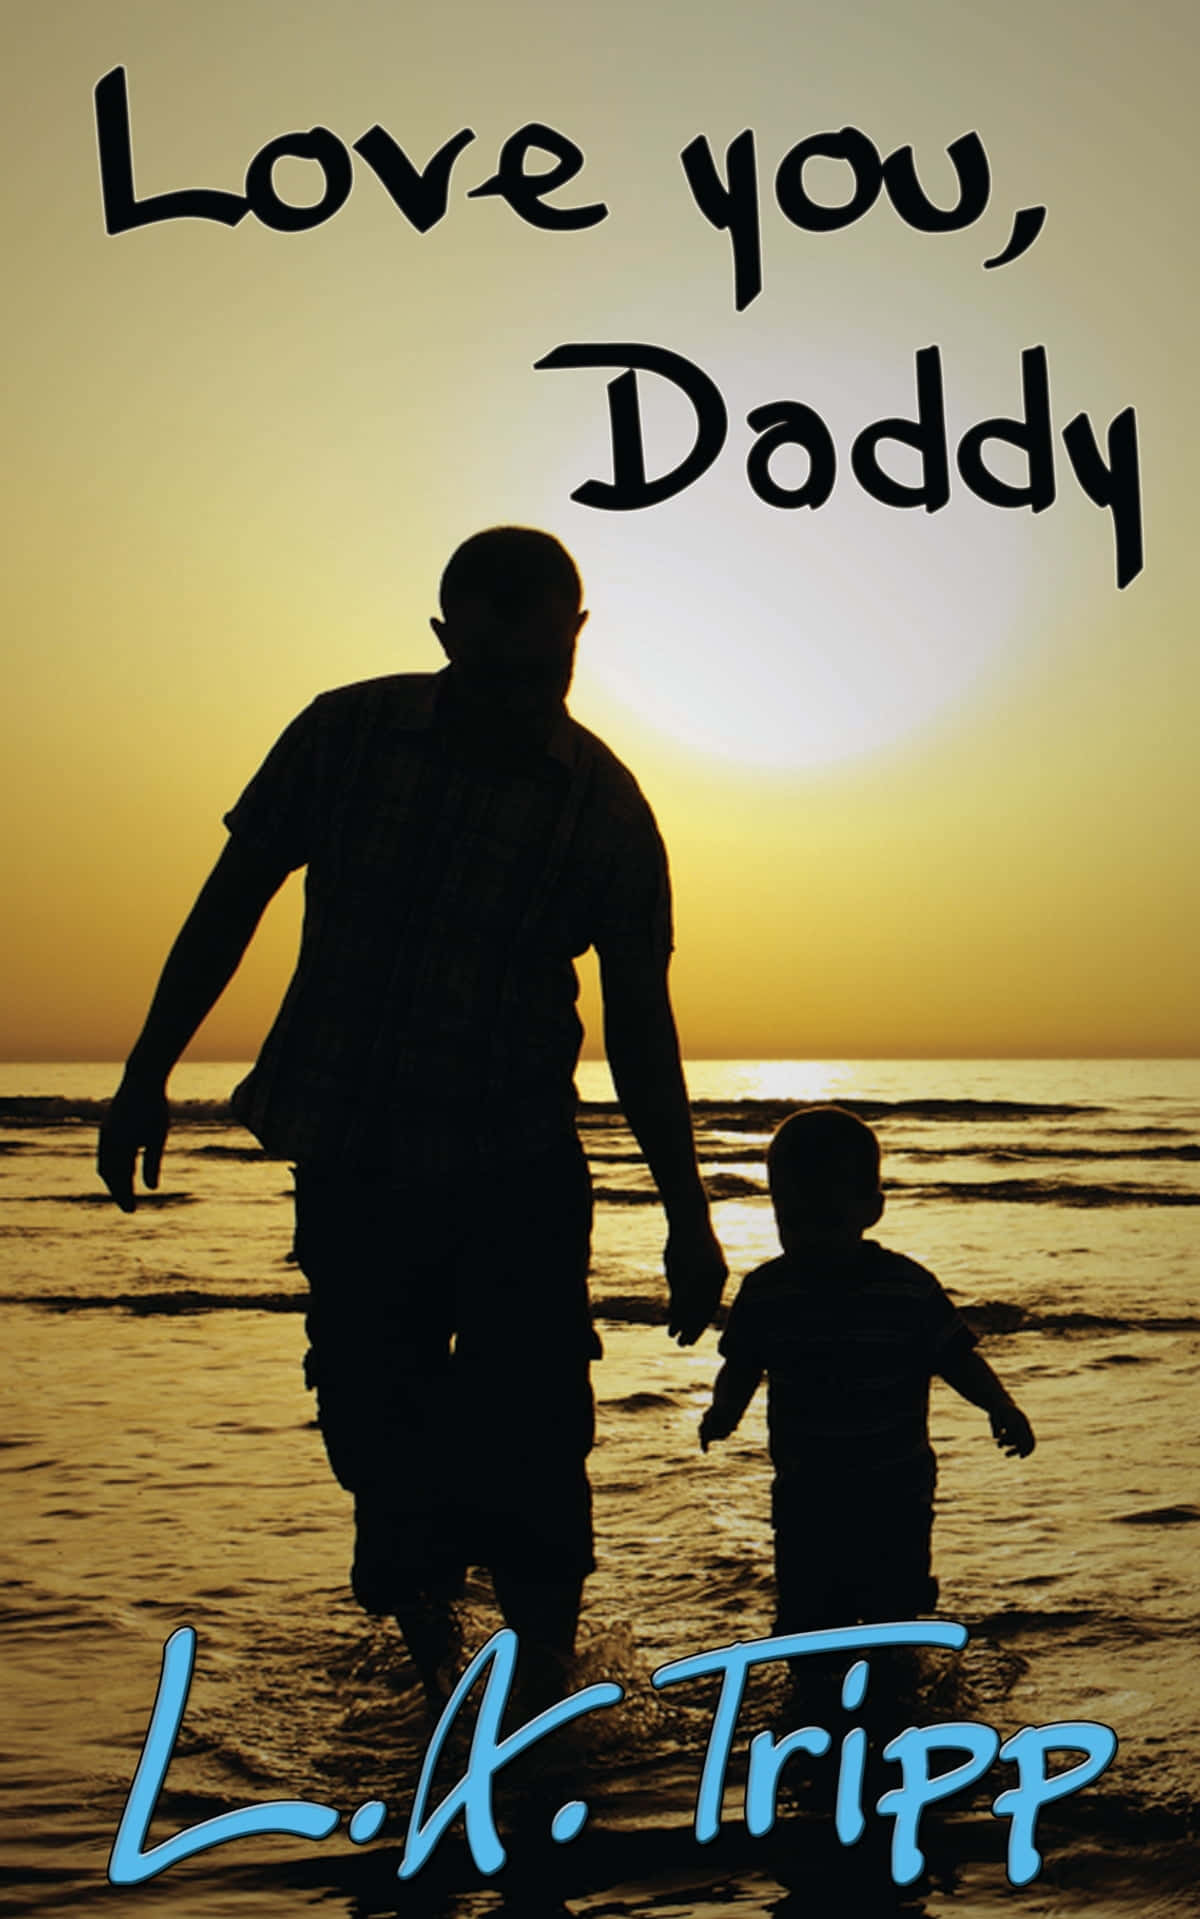 Download Daddy Wallpaper 